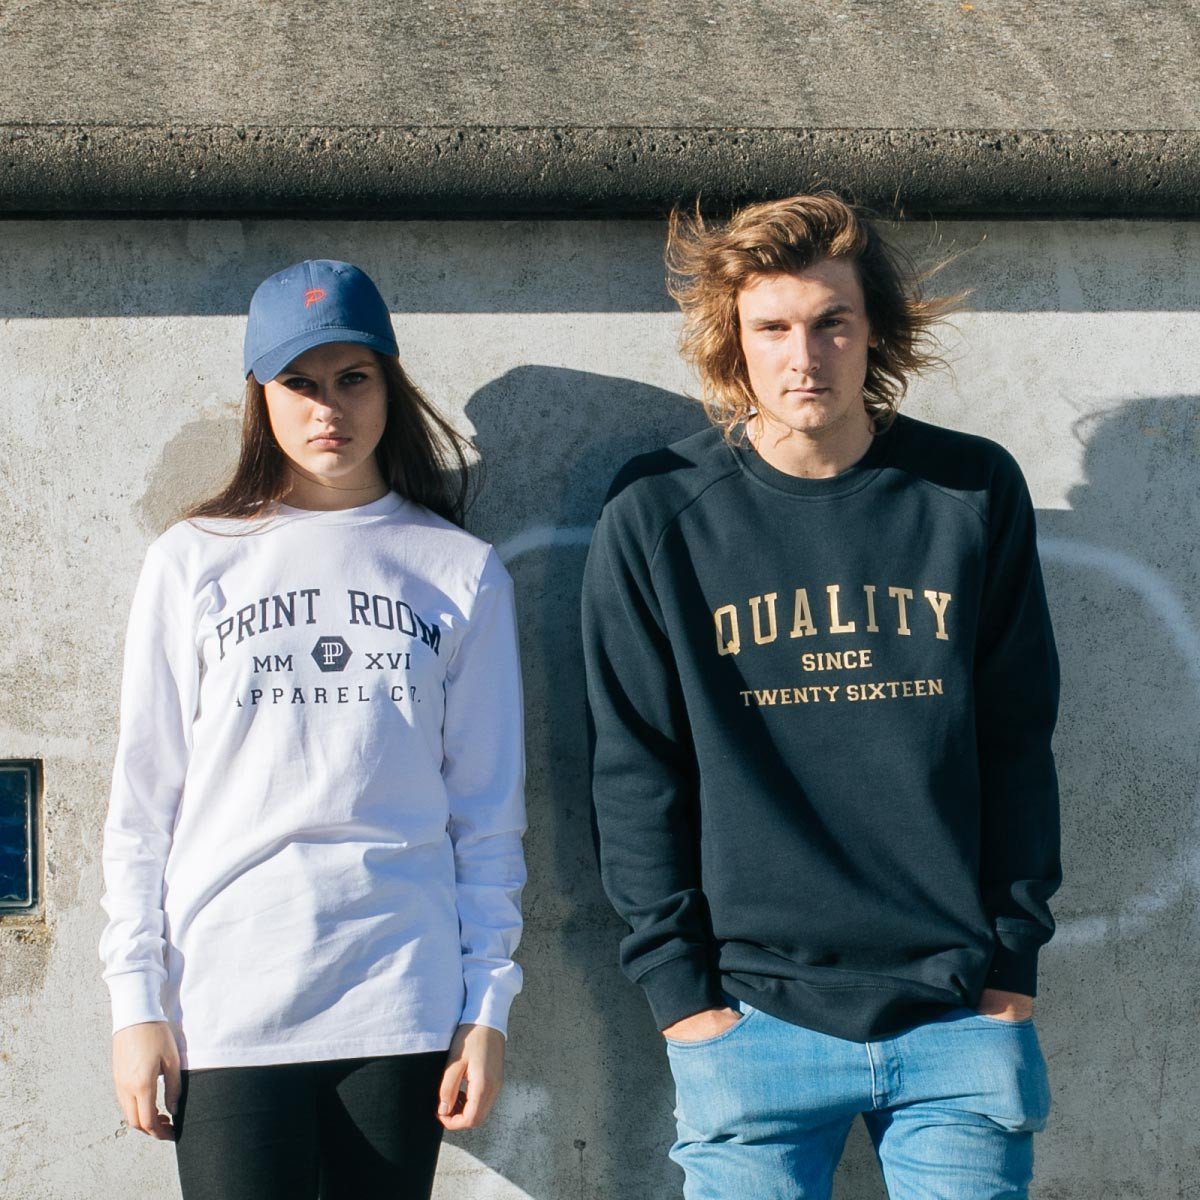 4 Products For Your Leavers Gear In 2021